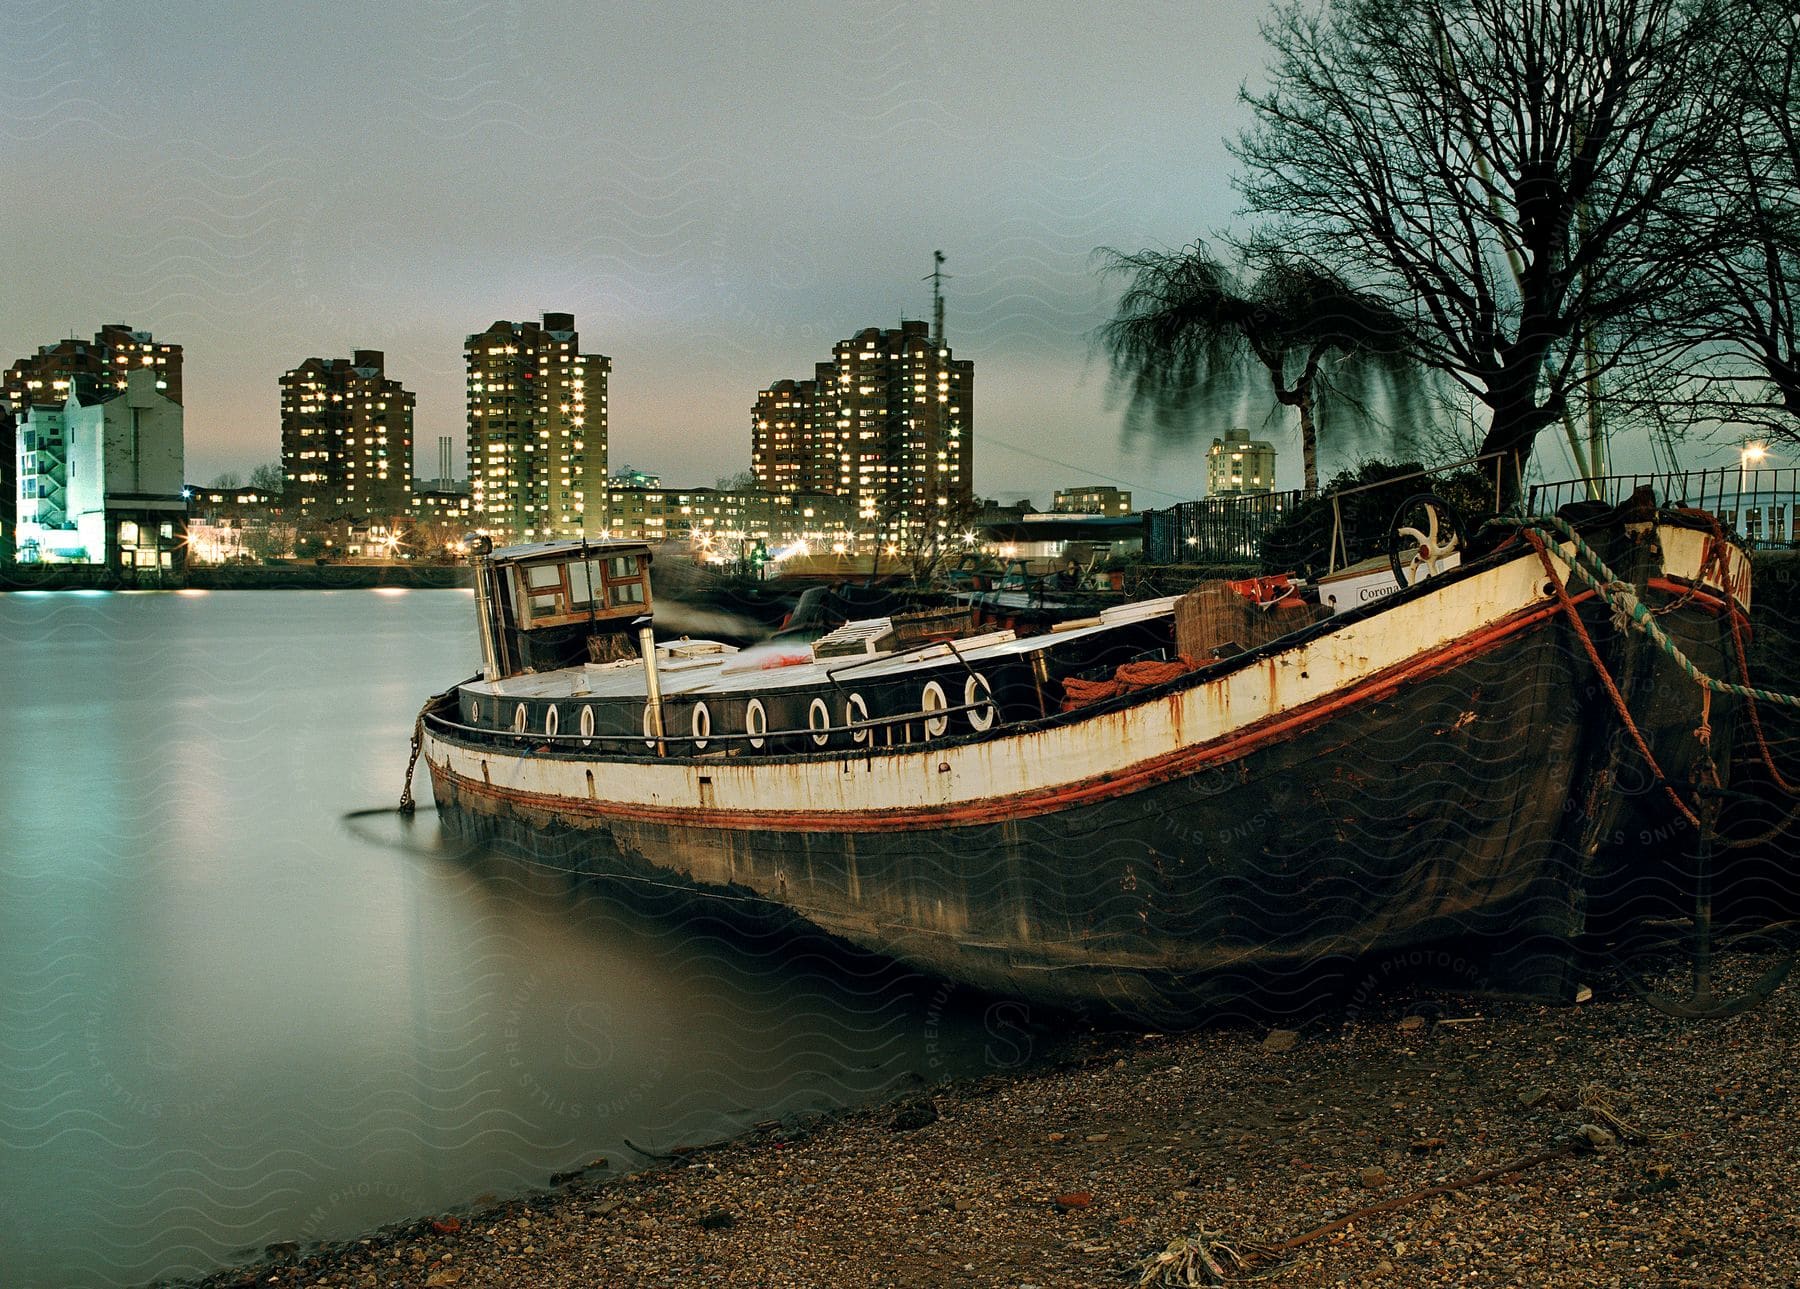 A decaying boat docked on a city shore